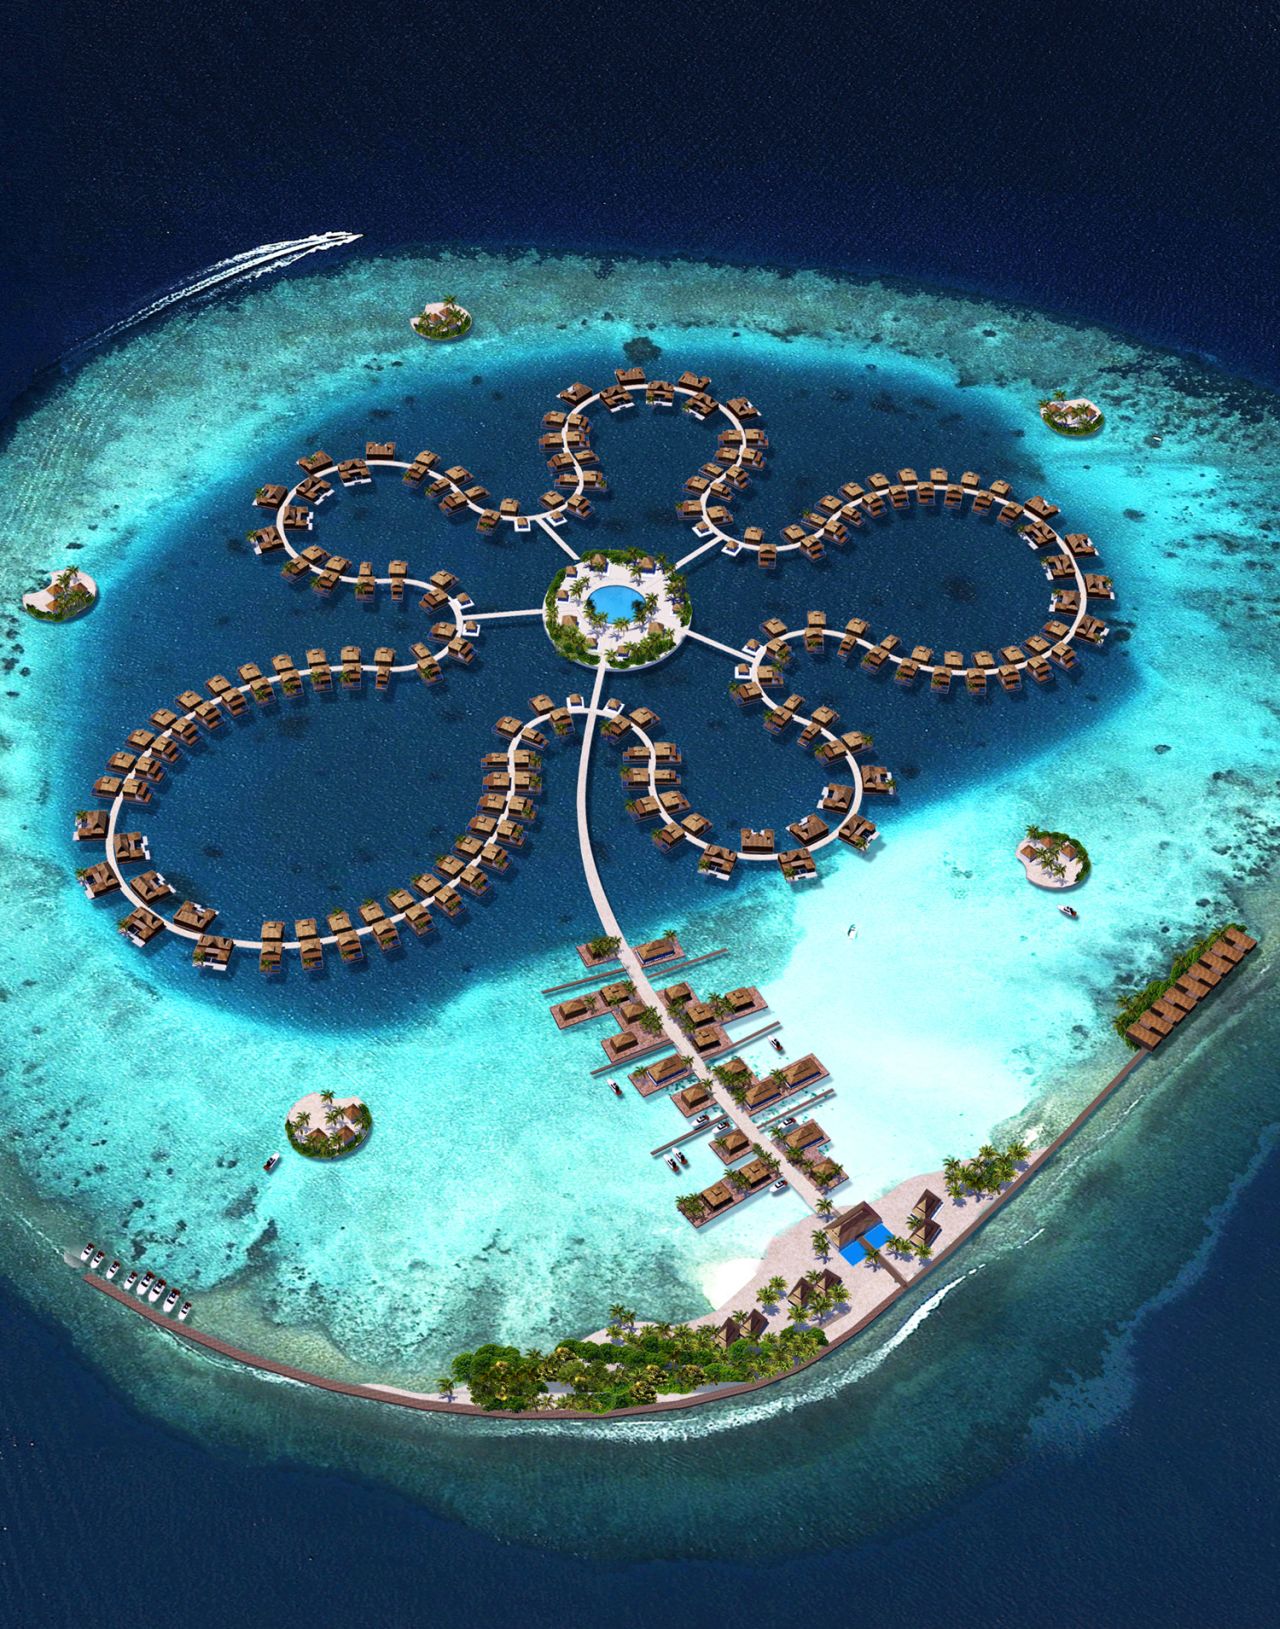 Krystall's designers, Dutch Dockyards, are already involved in constructing Ocean Flower, a floating resort off the coast of the Maldives.